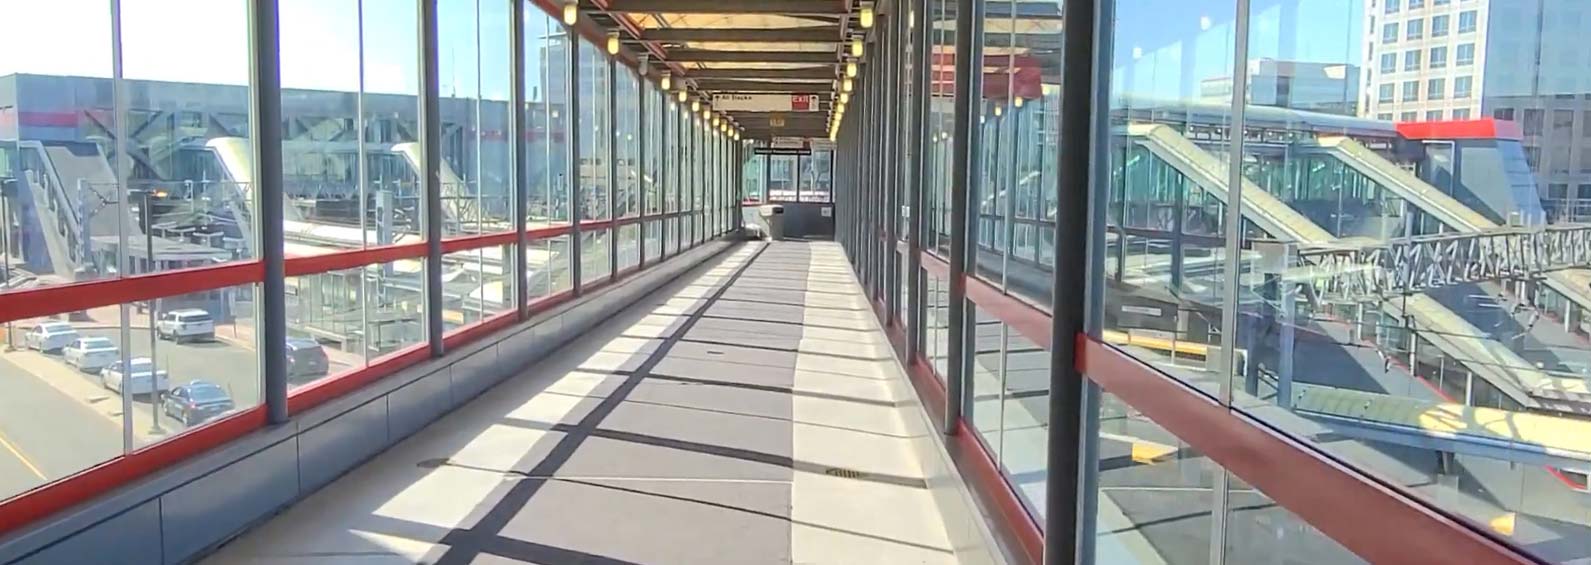 Glass window-enclosed elevated walkway spanning a road.